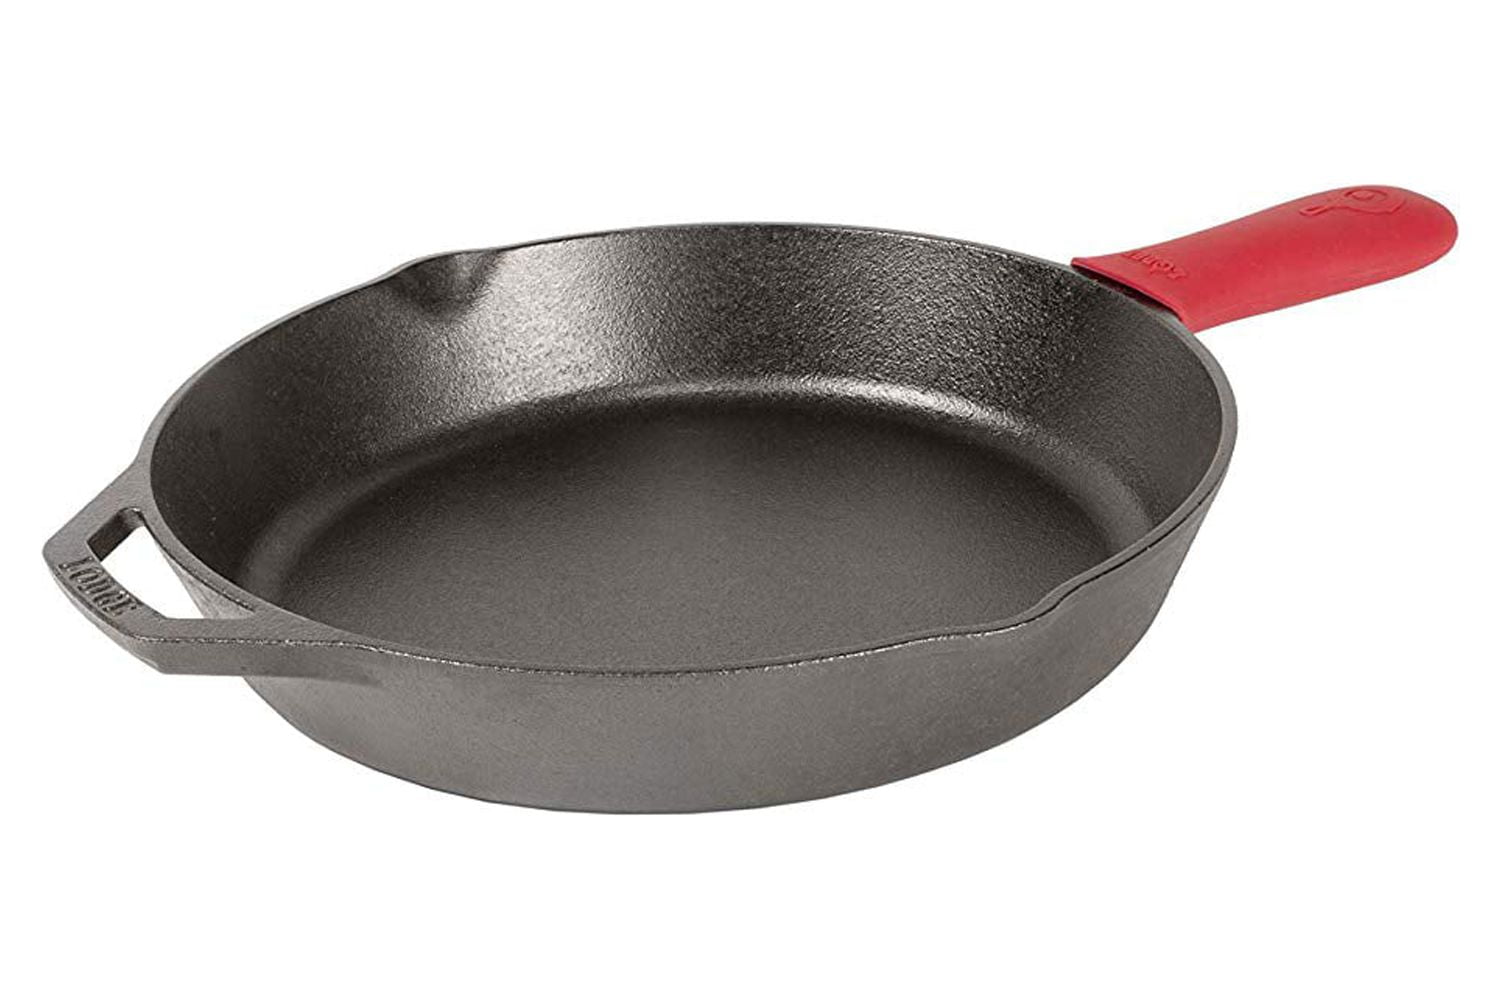 Emeril Lagasse Pre-Seasoned Cast Iron 12 Skillet with Silicone